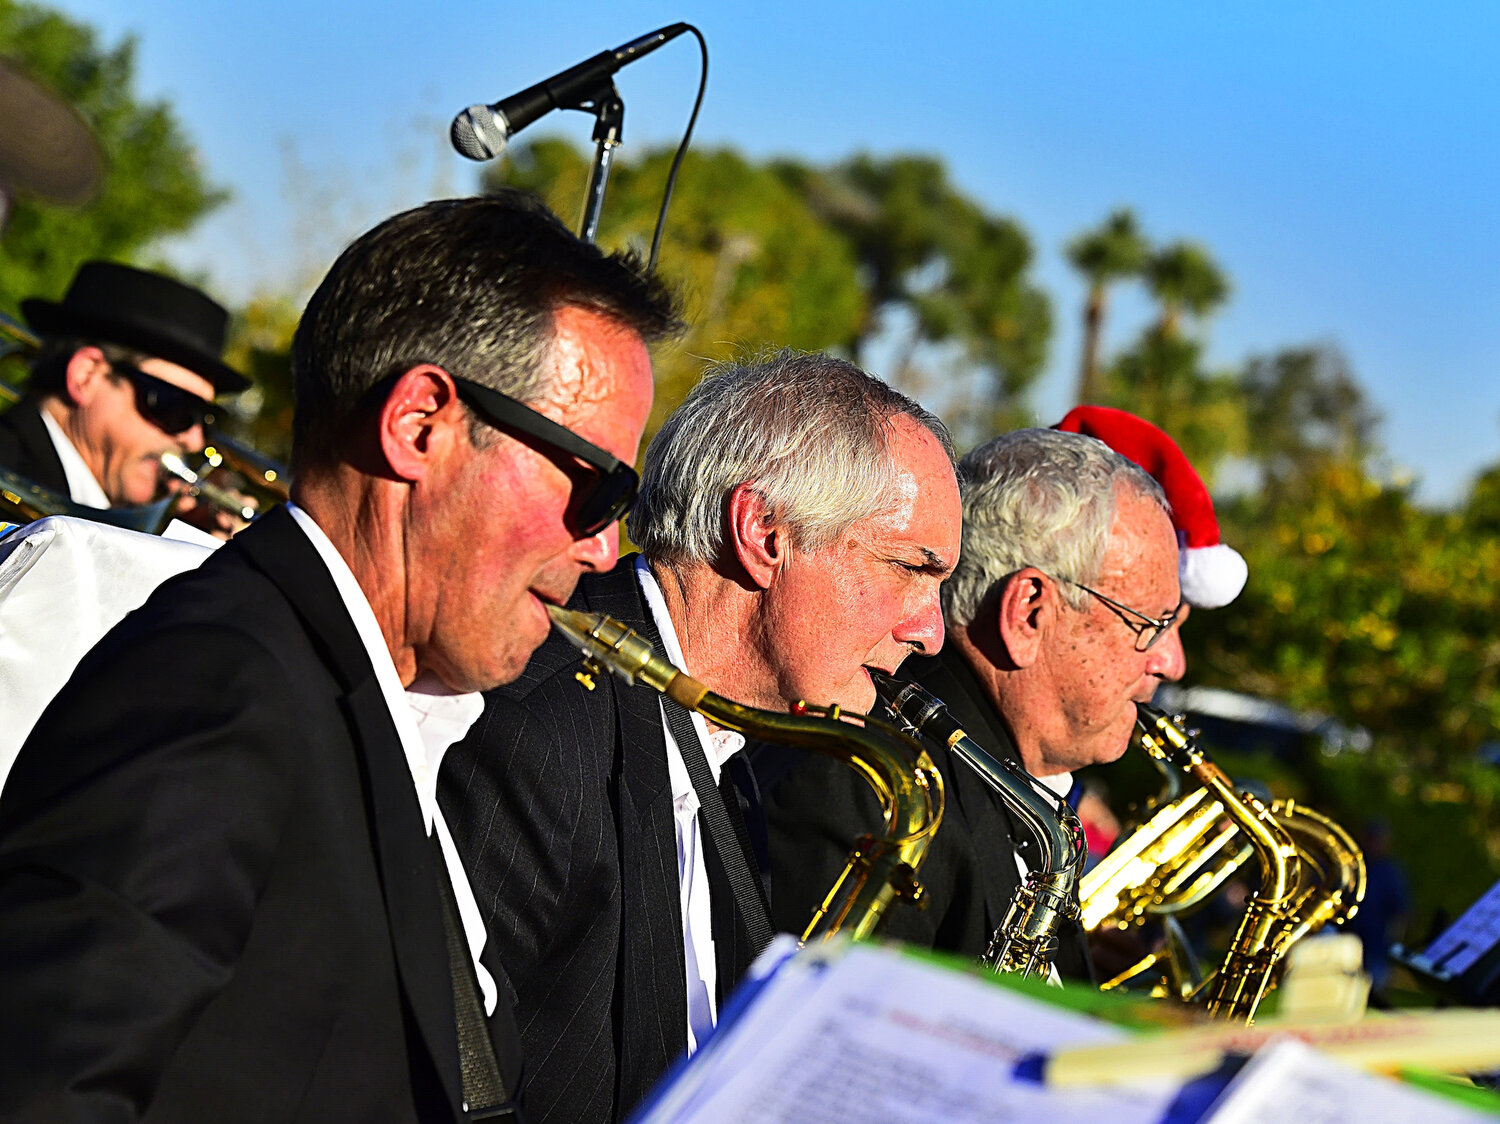 The AZ Swing Kings will present a free show of Christmas music Dec. 14 at Theater Works.